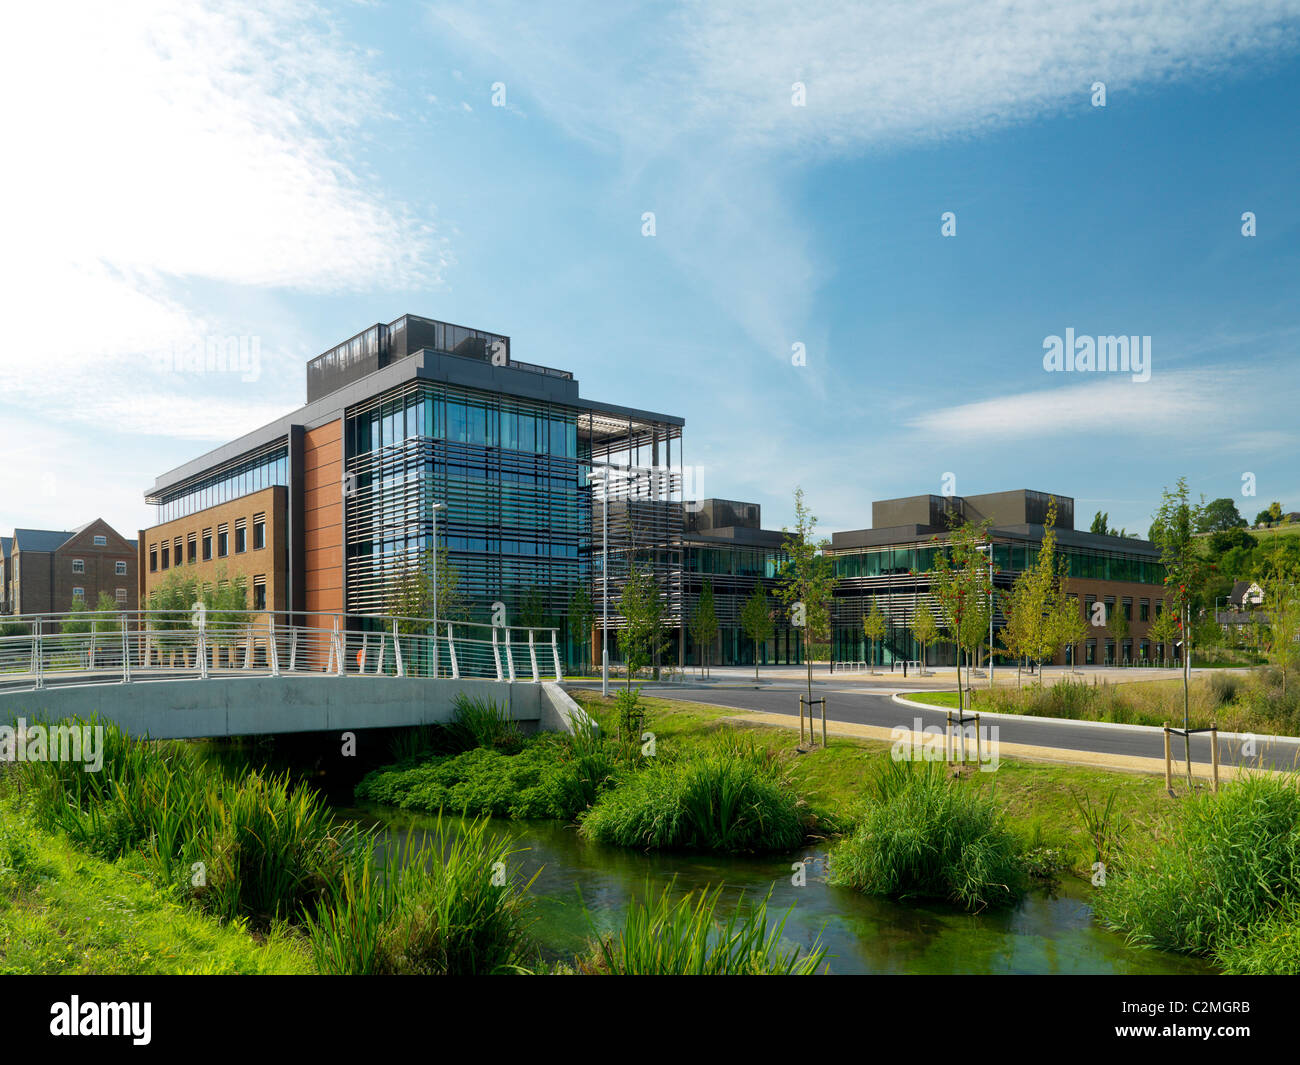 Glory Park, Wooburn Green, High Wycombe. An environmentally conscious business park. Grade A BREEAM 'excellent' offices. Stock Photo